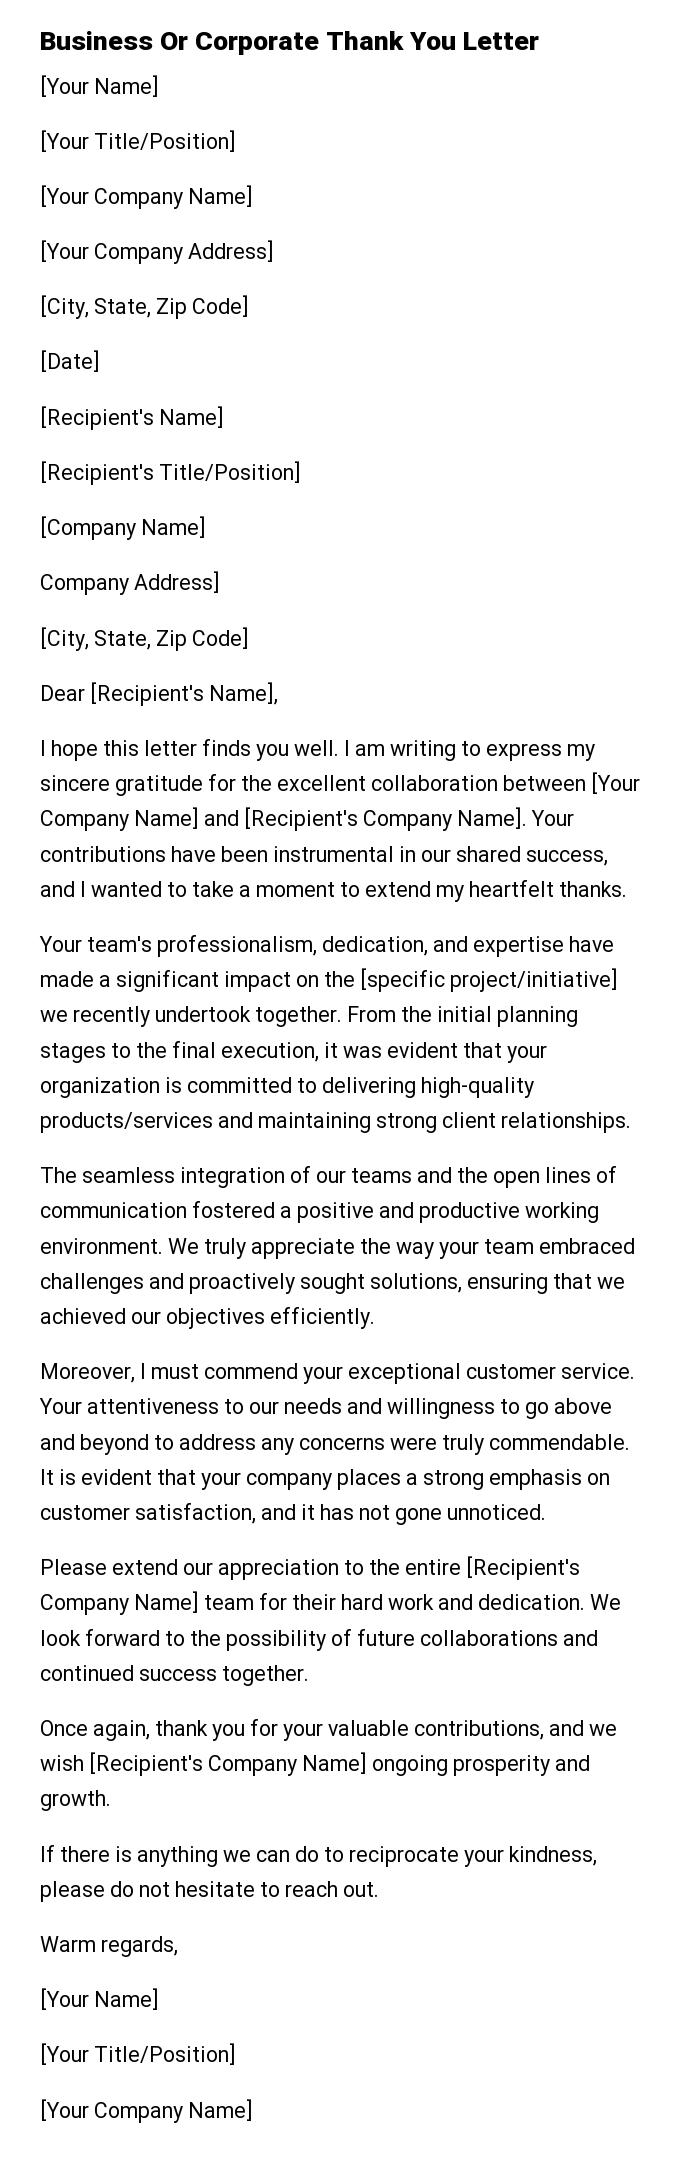 Business Or Corporate Thank You Letter